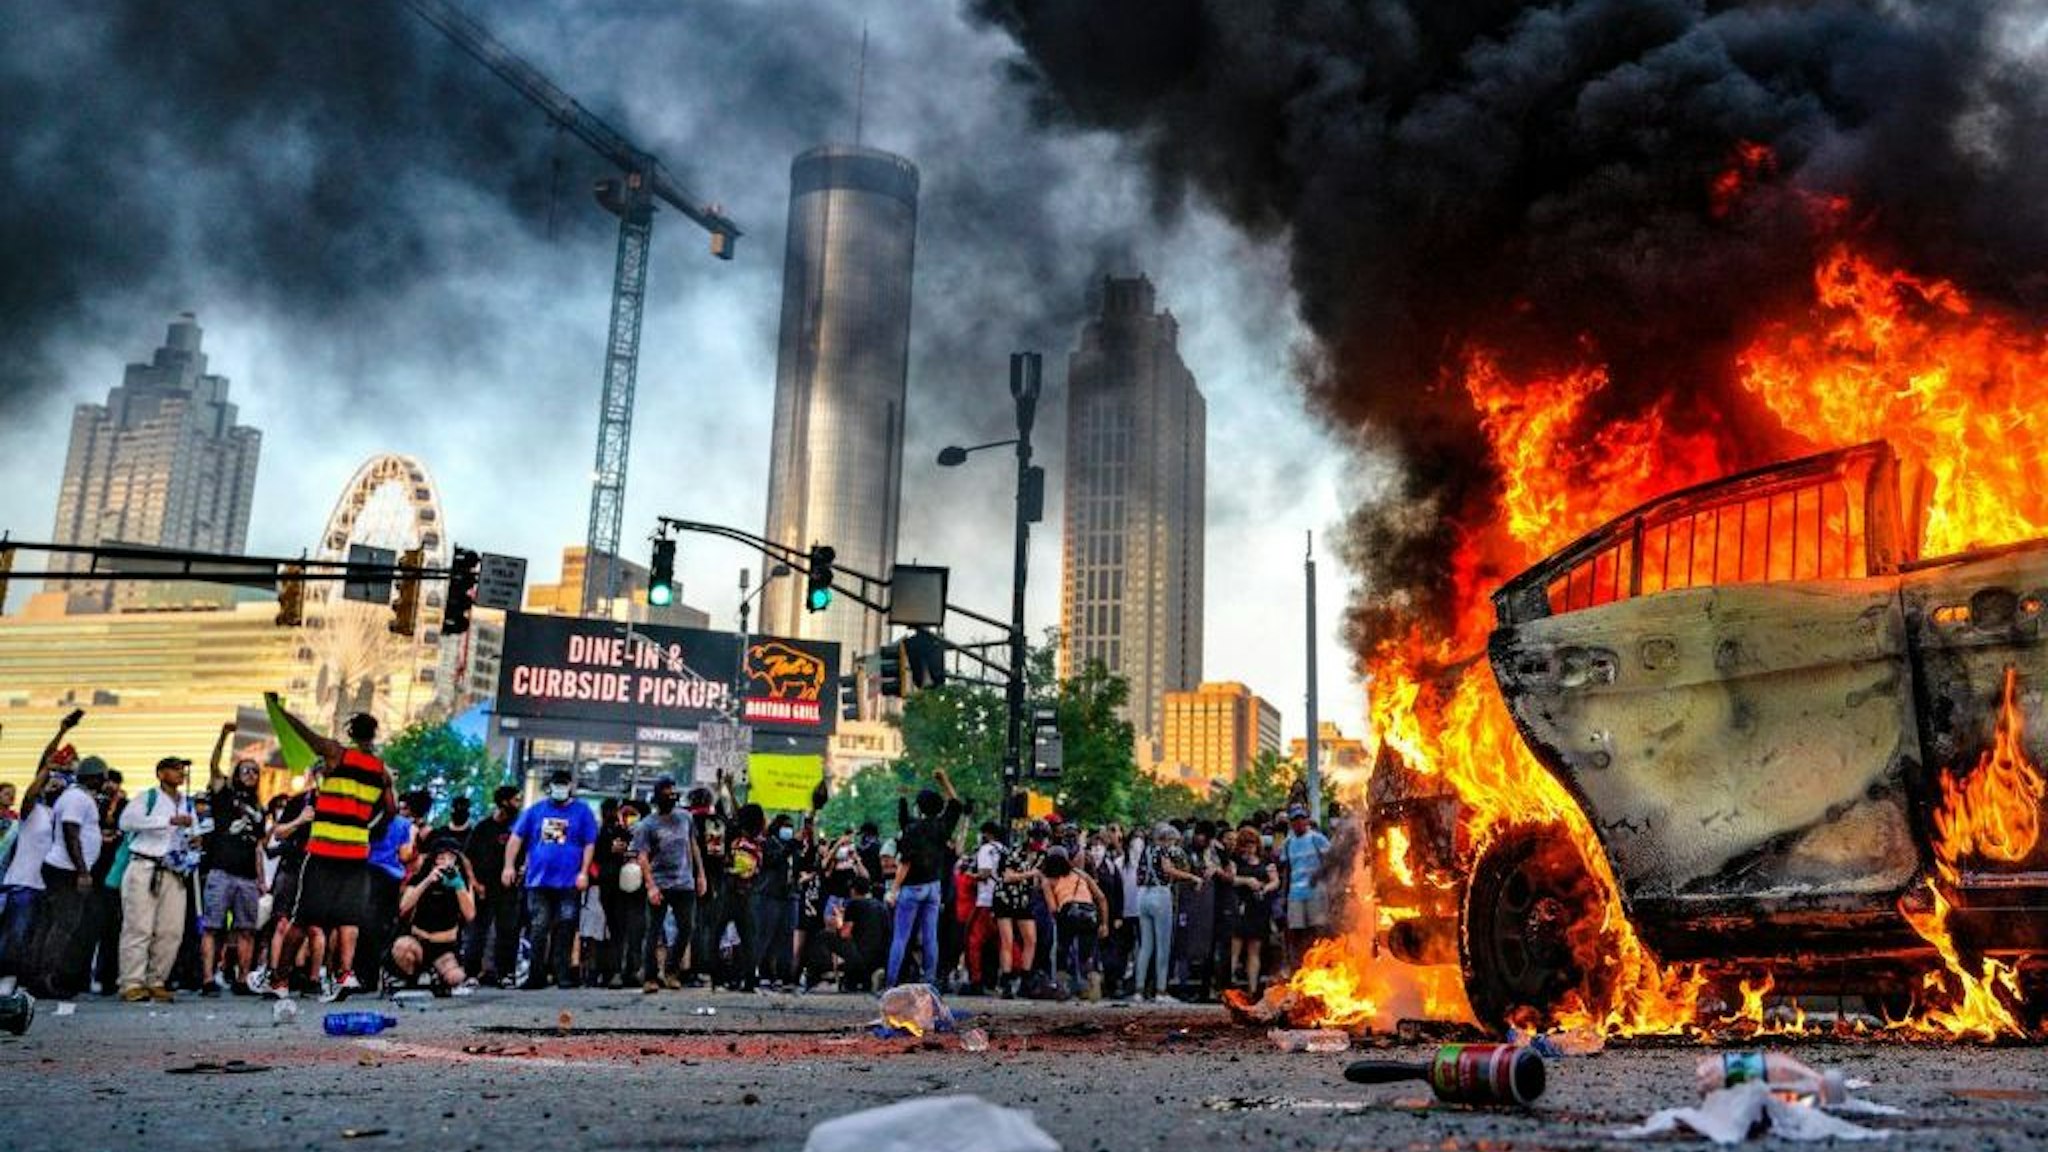 Protesters set a vehicle on fire during a protest following the death of George Floyd outside of the CNN Center next to Centennial Olympic Park in downtown Atlanta, Georgia, United States on May 29, 2020. It was announced Friday that Derek Chauvin, the former Minneapolis police officer caught on camera with his knee on Floyd√¢s neck, has been arrested and charged with third-degree murder and manslaughter. (Photo by Ben Hendren/Anadolu Agency via Getty Images)